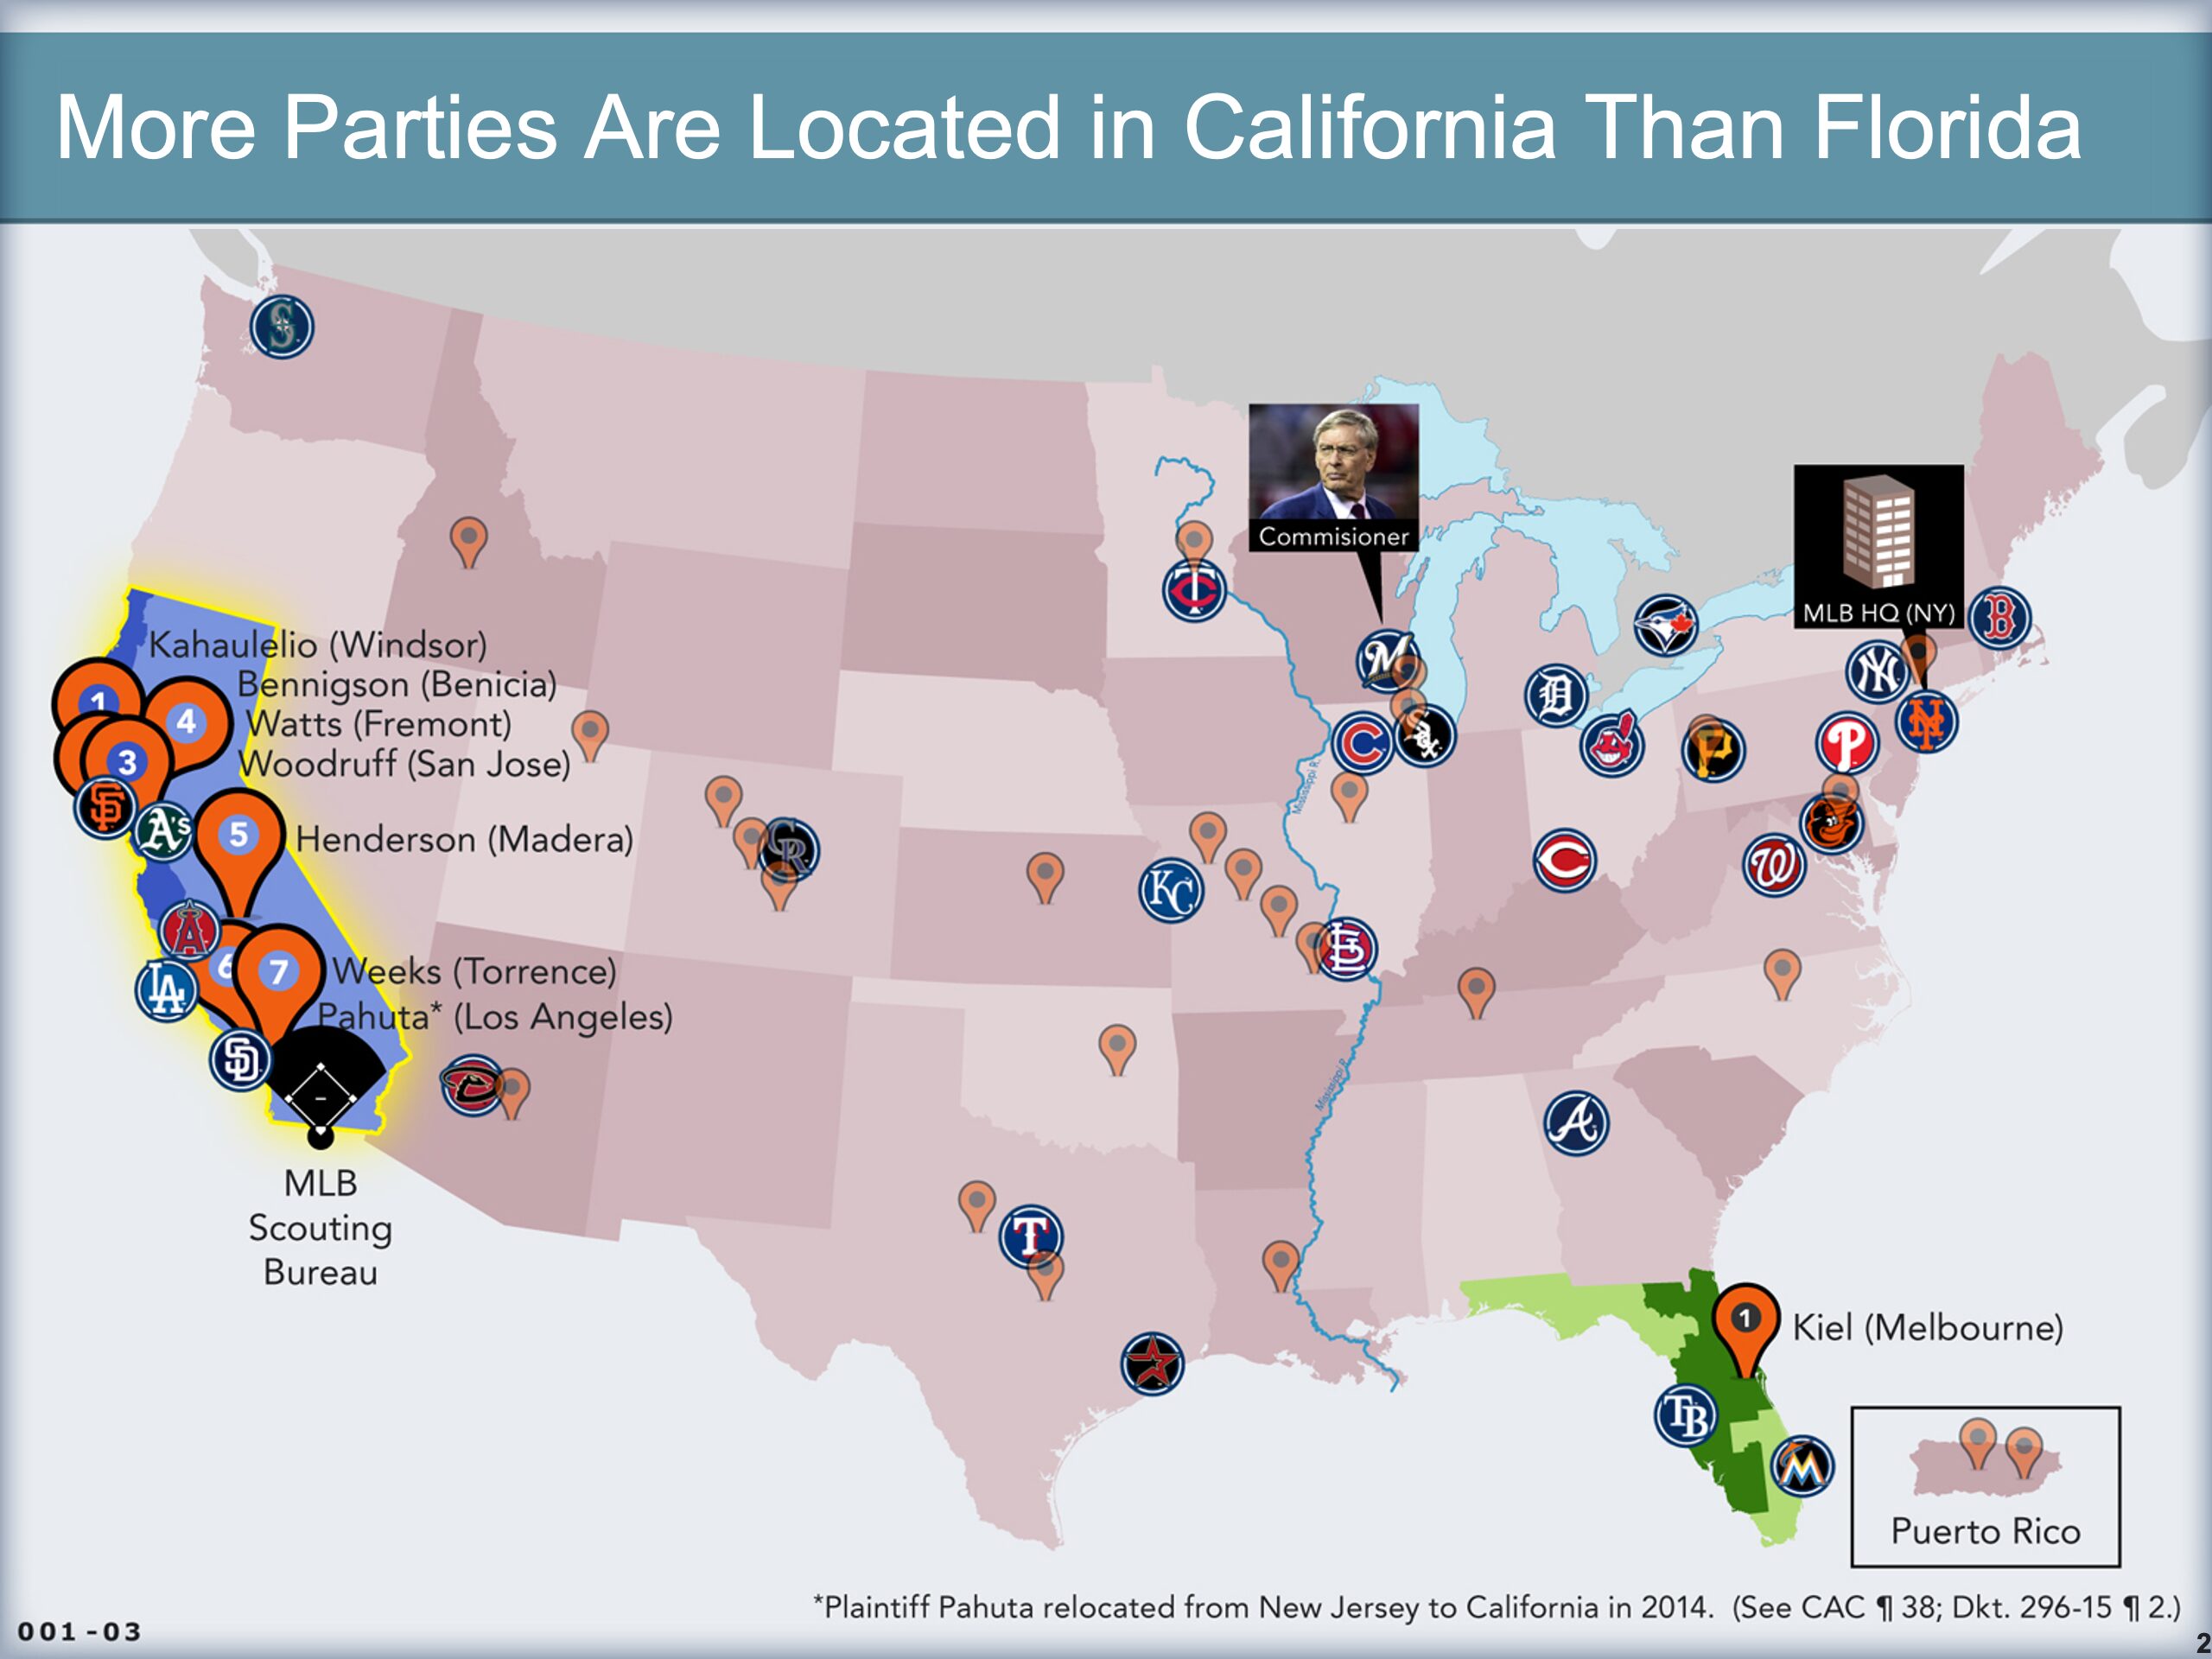 More Parties are located n california than florida